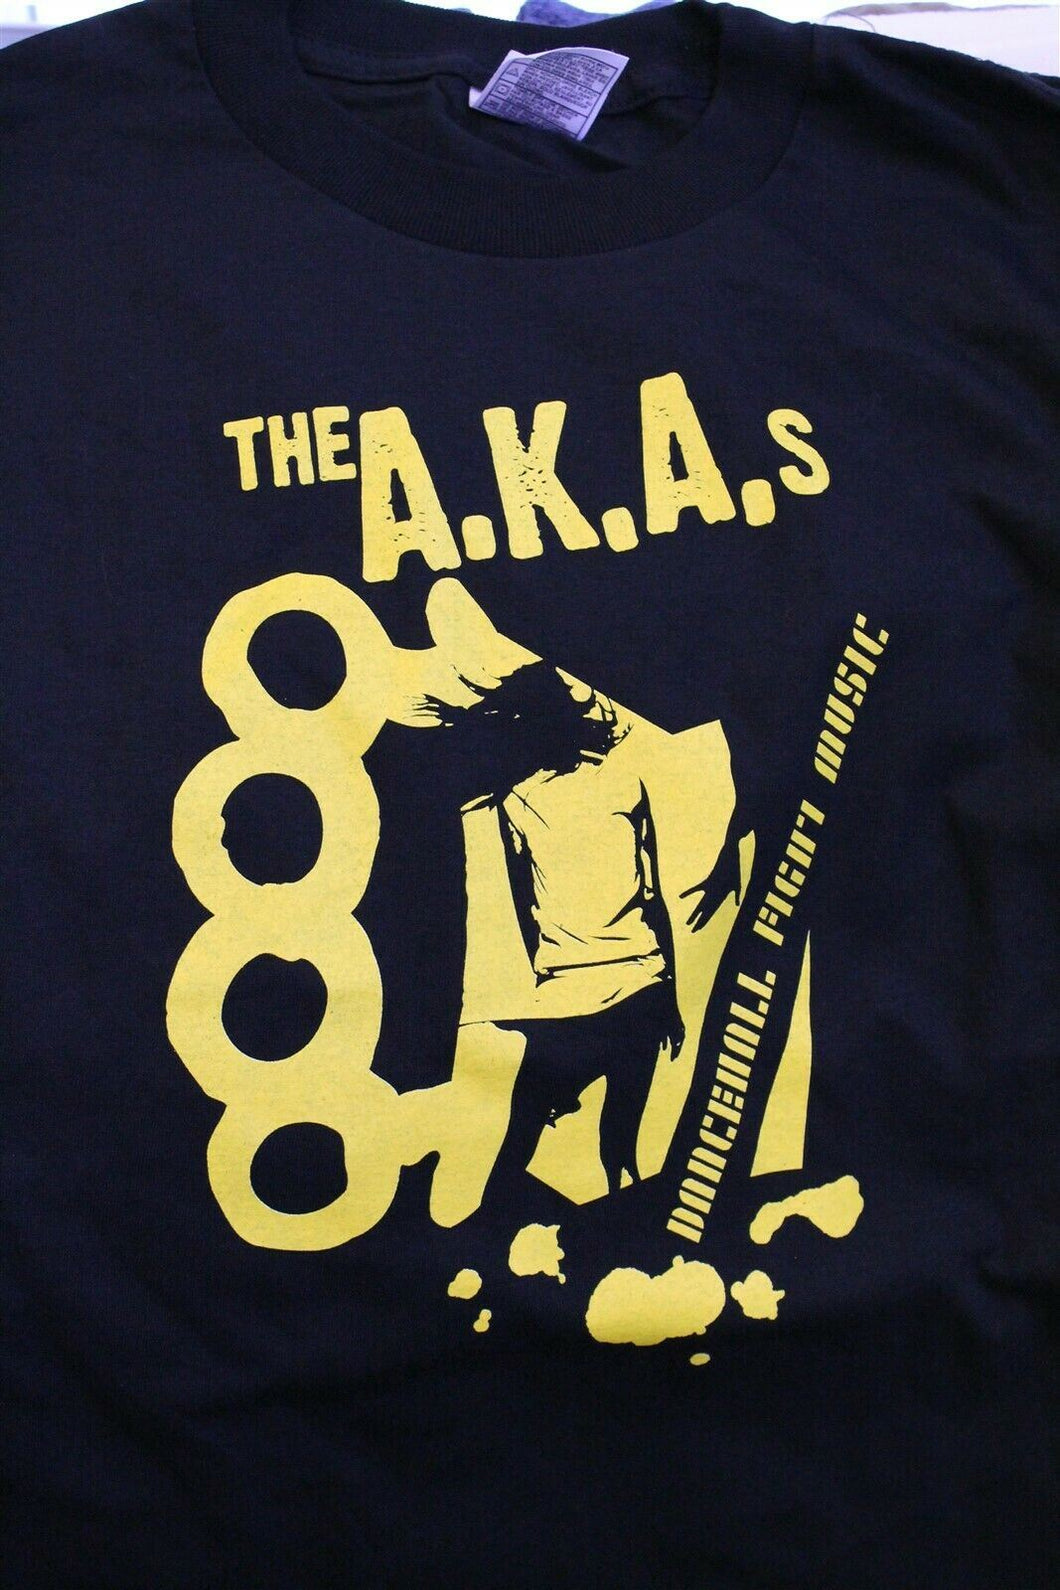 THE A.K.A.s - Dancehall Fight Music T-shirt ~Never Worn~ Large